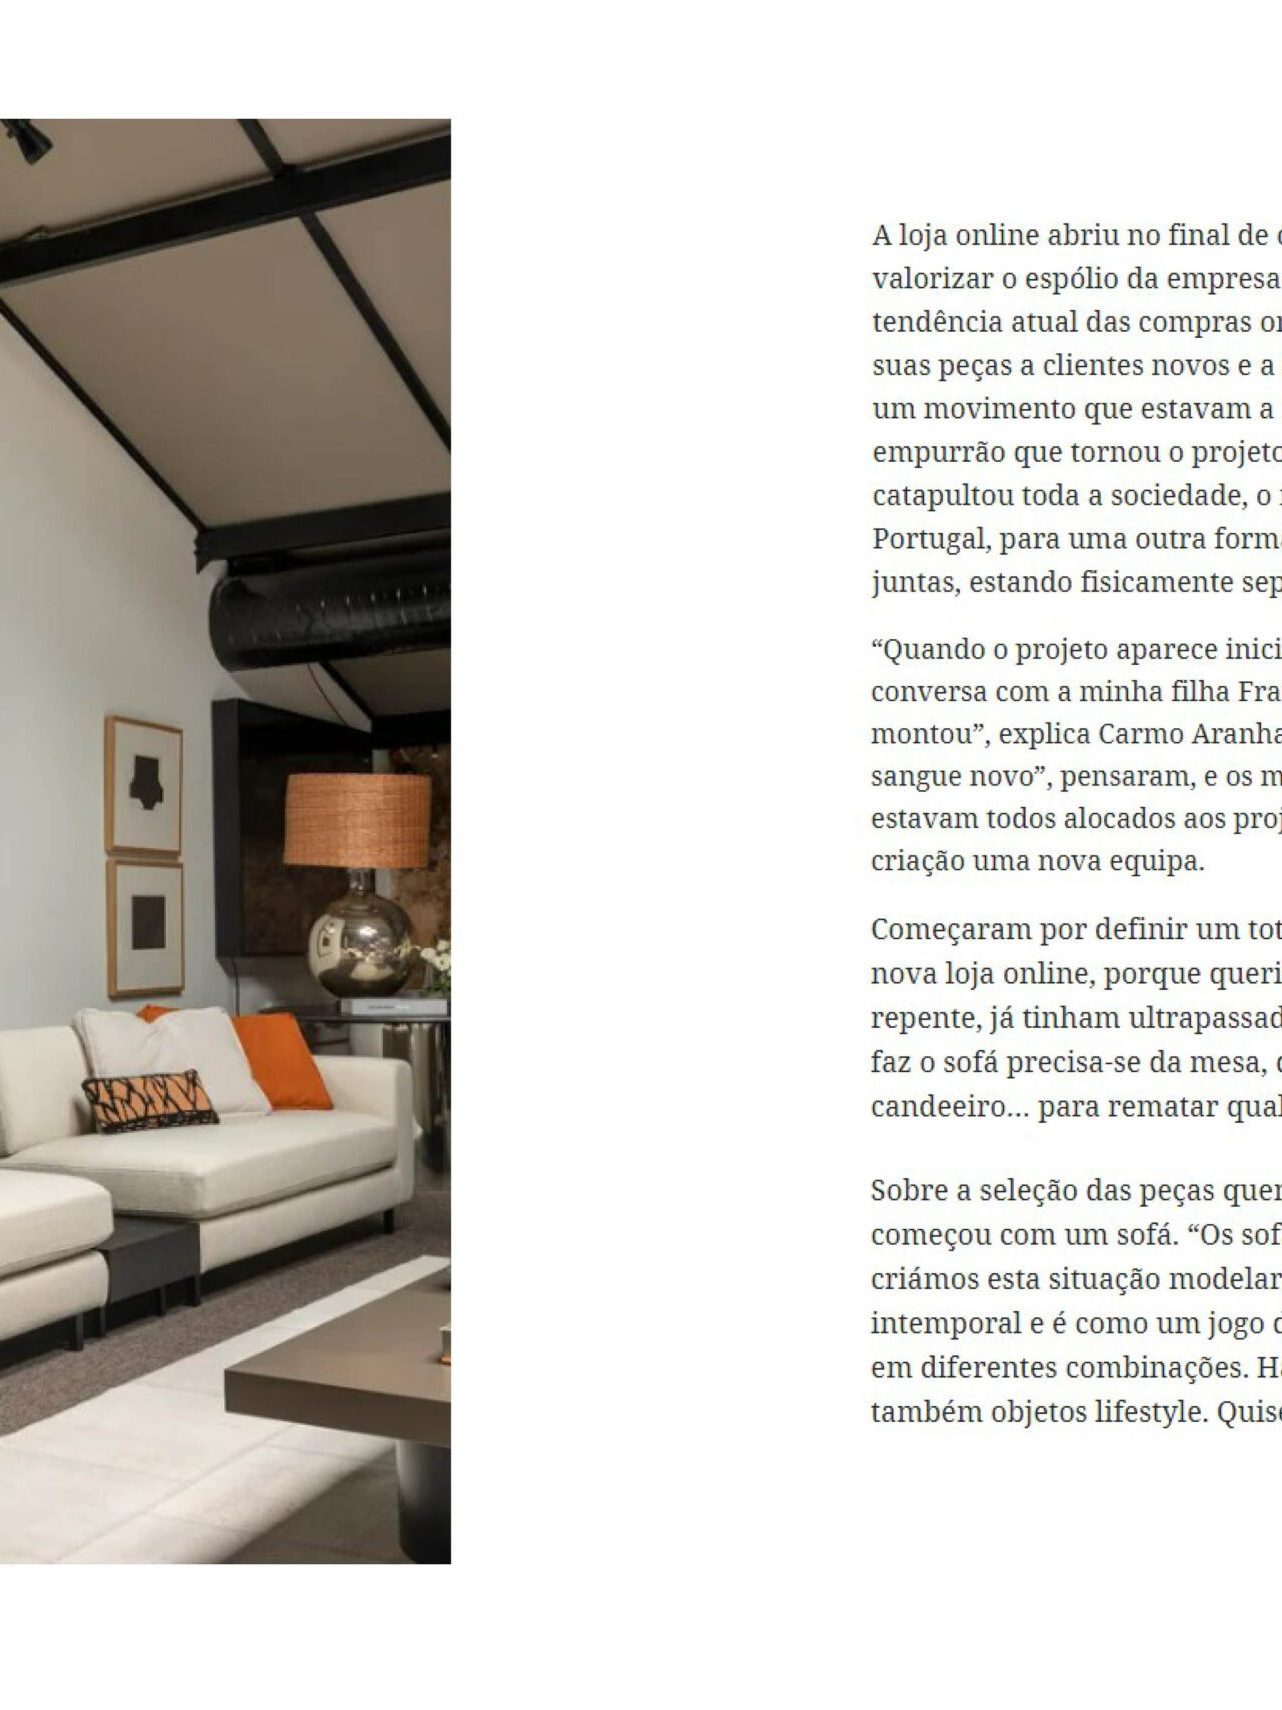 SAV observador december 2022 review design architecture project luxury interview showroom deco exclusive environments project yellow online shop partners rosário tello carmo aranha 40 pieces furniture artful trays travertine versatility personality flexible charriot pitch black steel coffee table